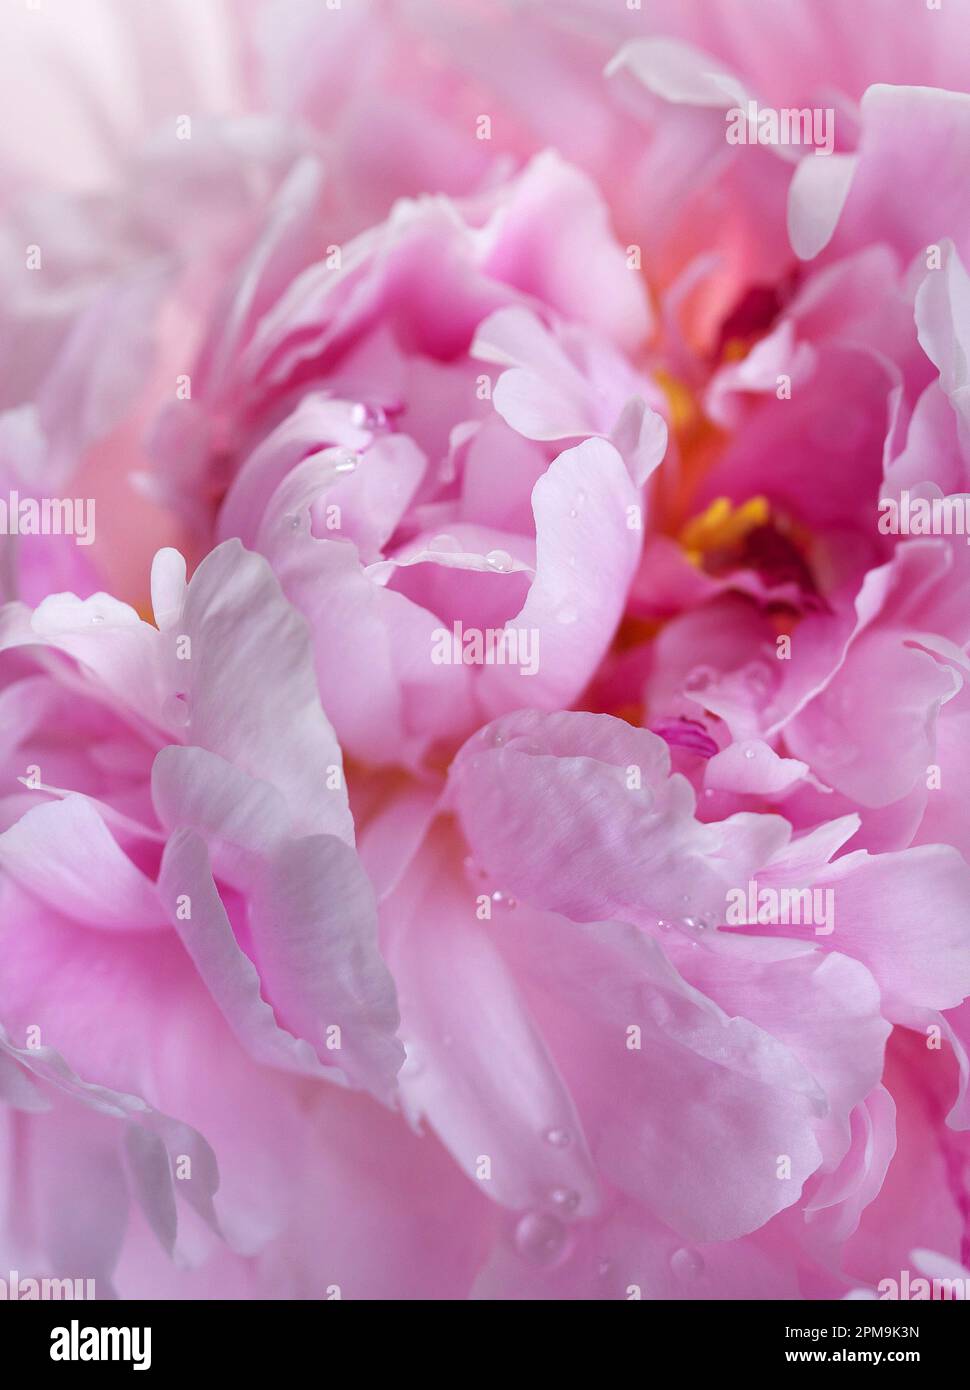 Double Pink Peony: high-key, soft focus close-up, studio image of the multiple rows of light pink petals unfurling from the centre of the Peony Stock Photo